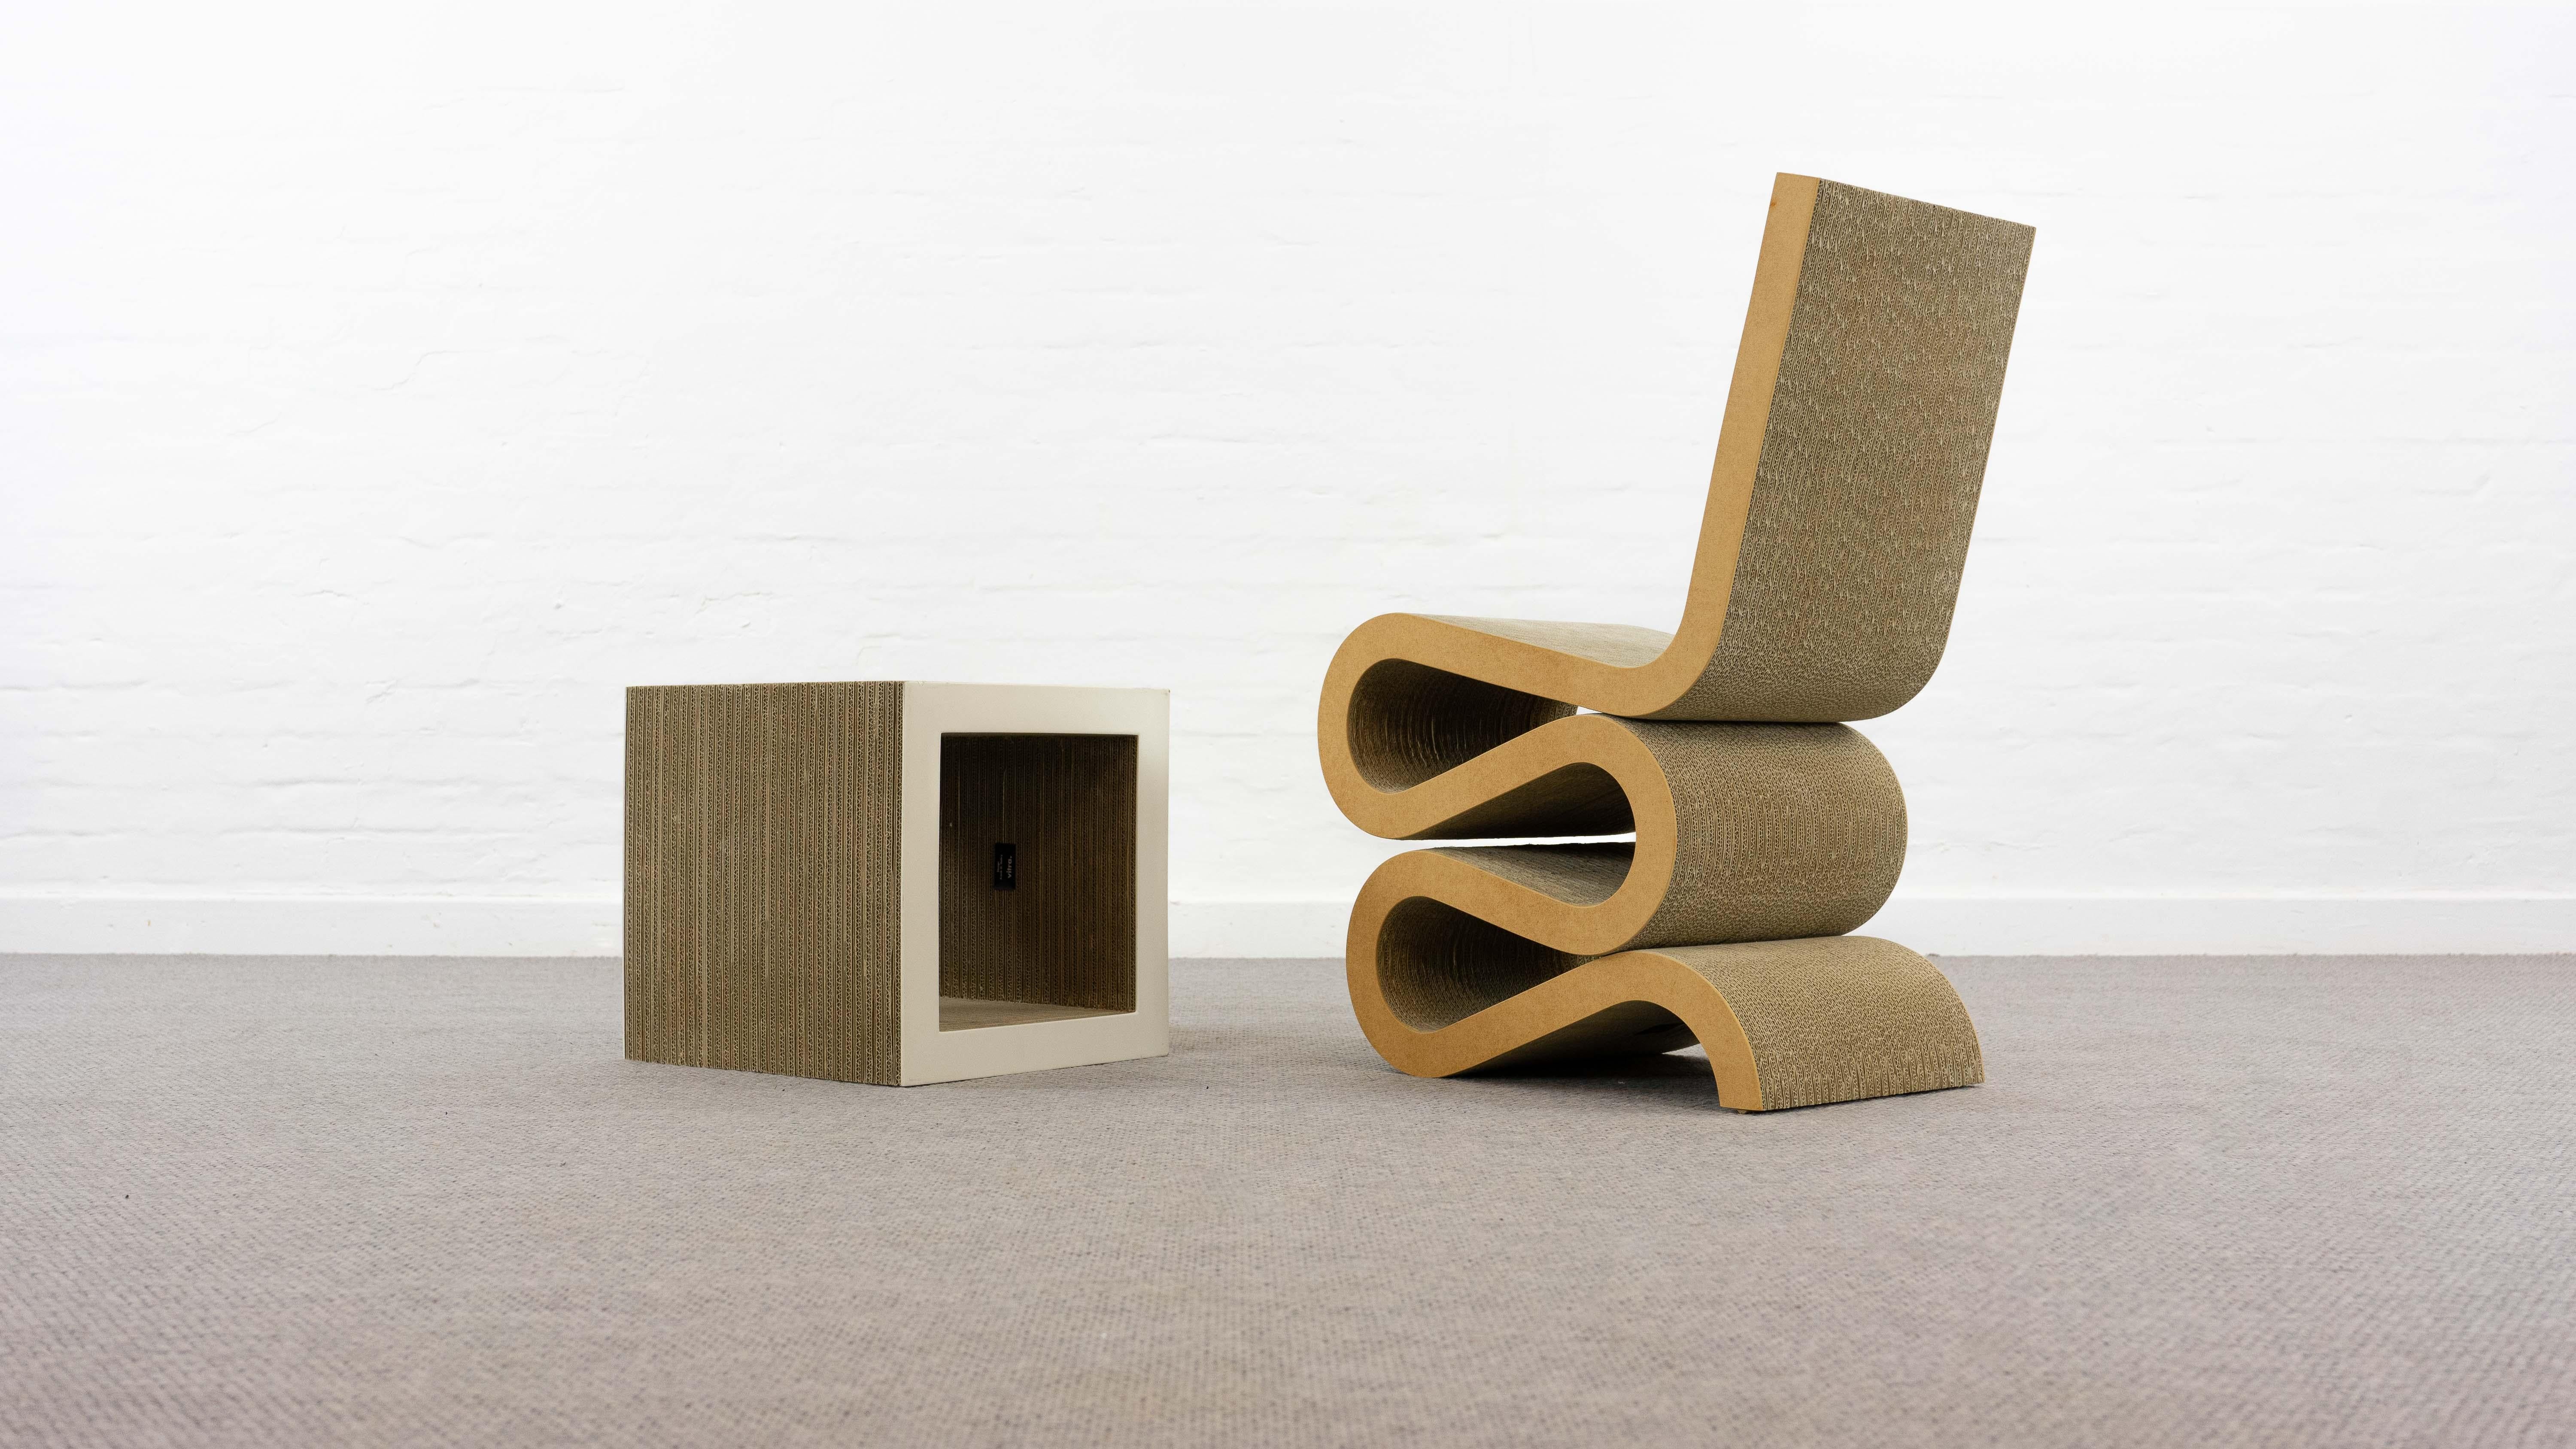 Wiggle chair, designed by the famous Architect Frank O. Gehry 1972. From “Easy Edges ” Series. The main idea was design cheap furniture from a recycleable material Cardboard. After a few month the Production was cancelled. This chair and the table